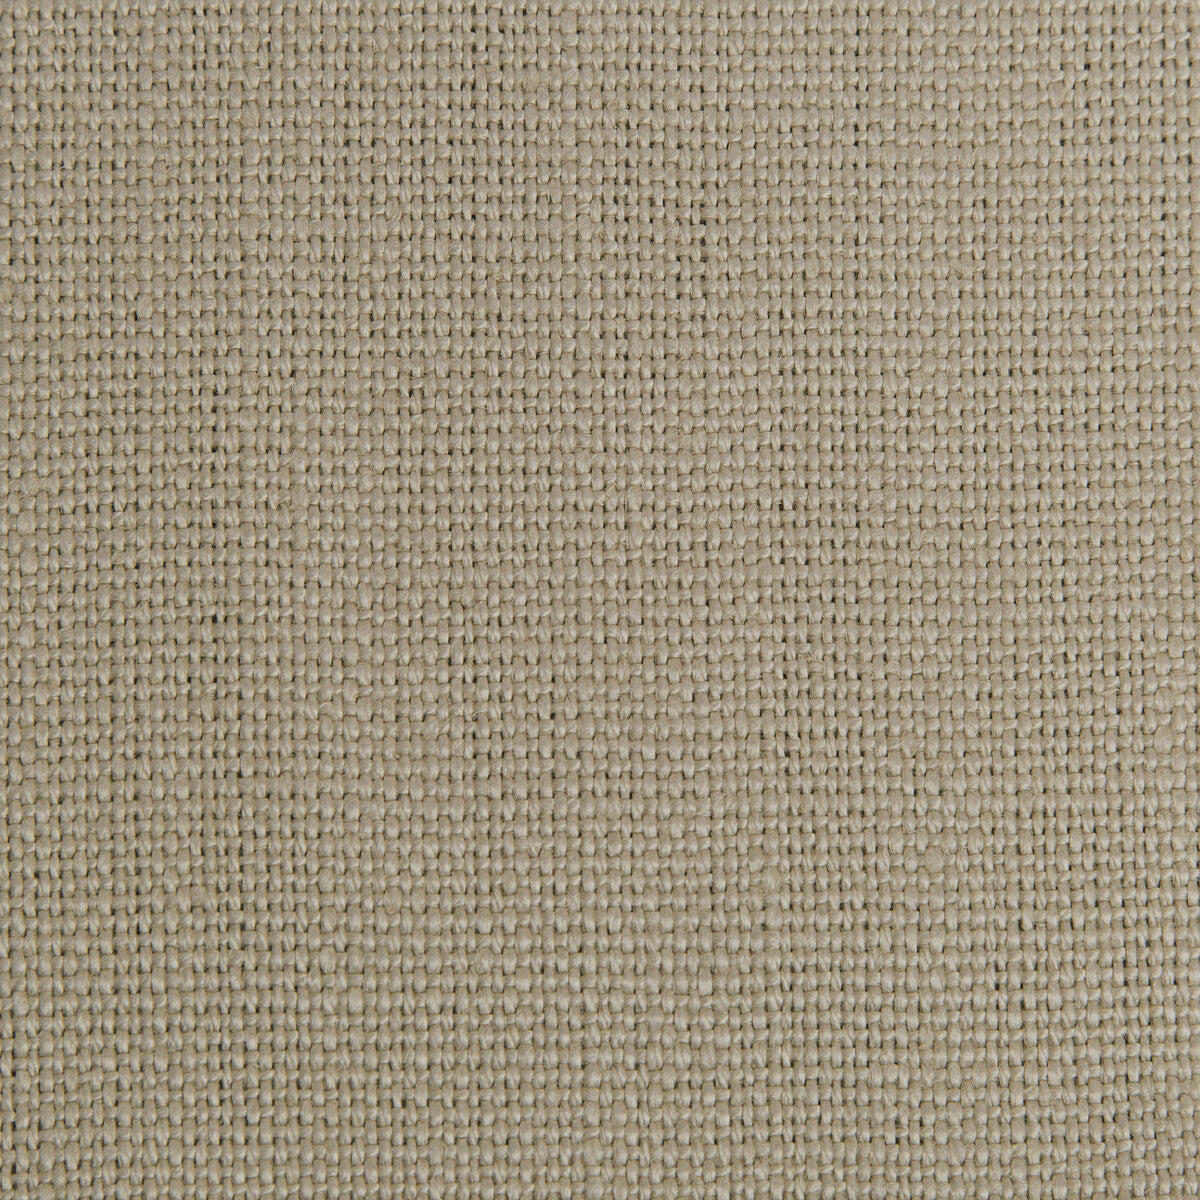 Stone Harbor fabric in taupe color - pattern 27591.1661.0 - by Kravet Basics